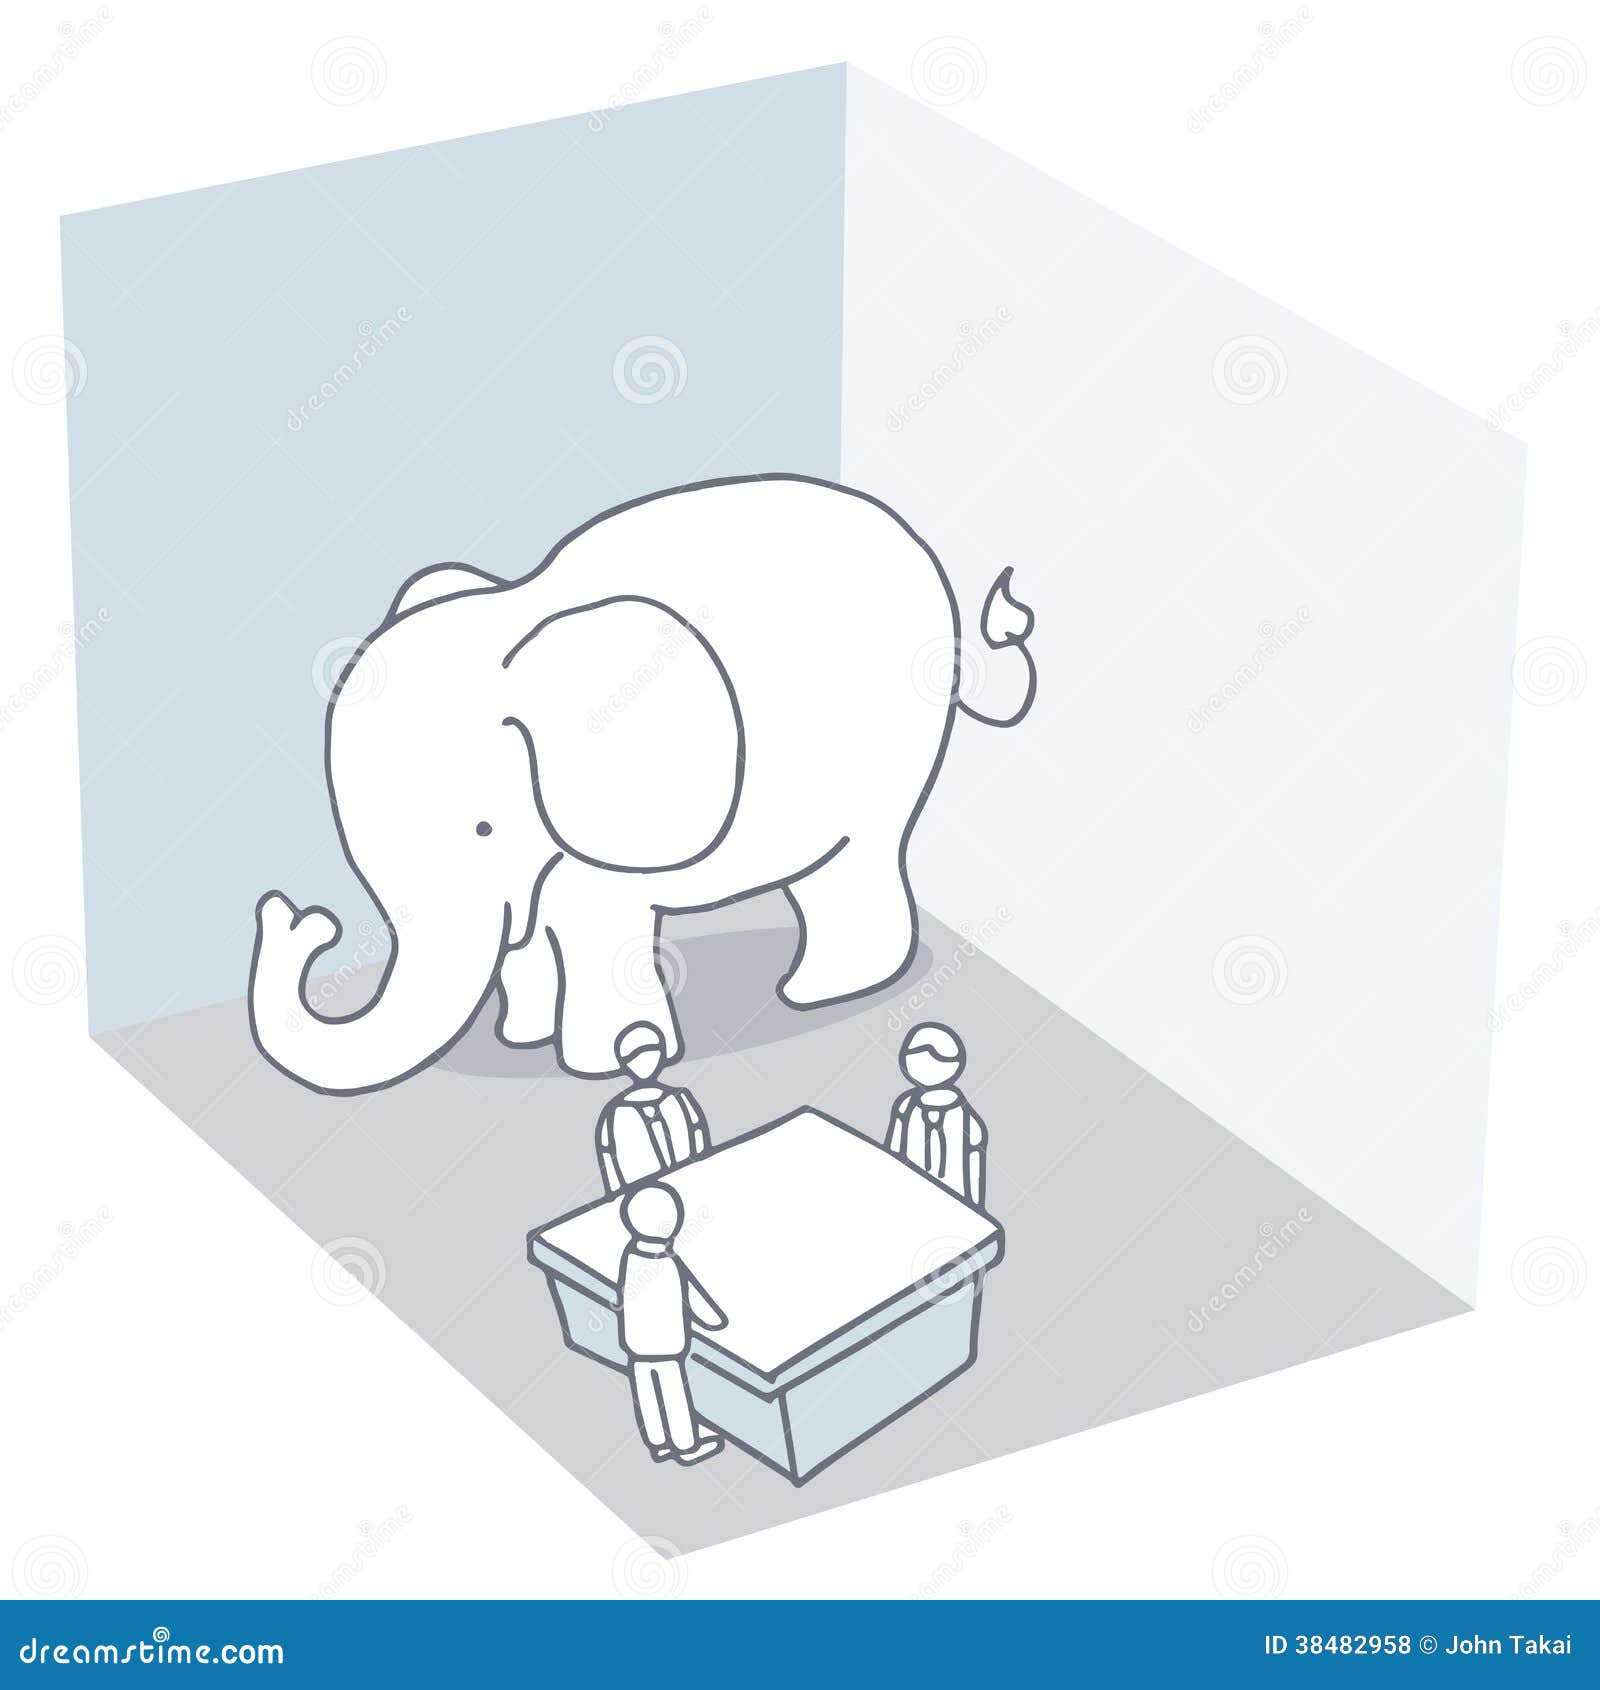 elephant in the room clipart - photo #1